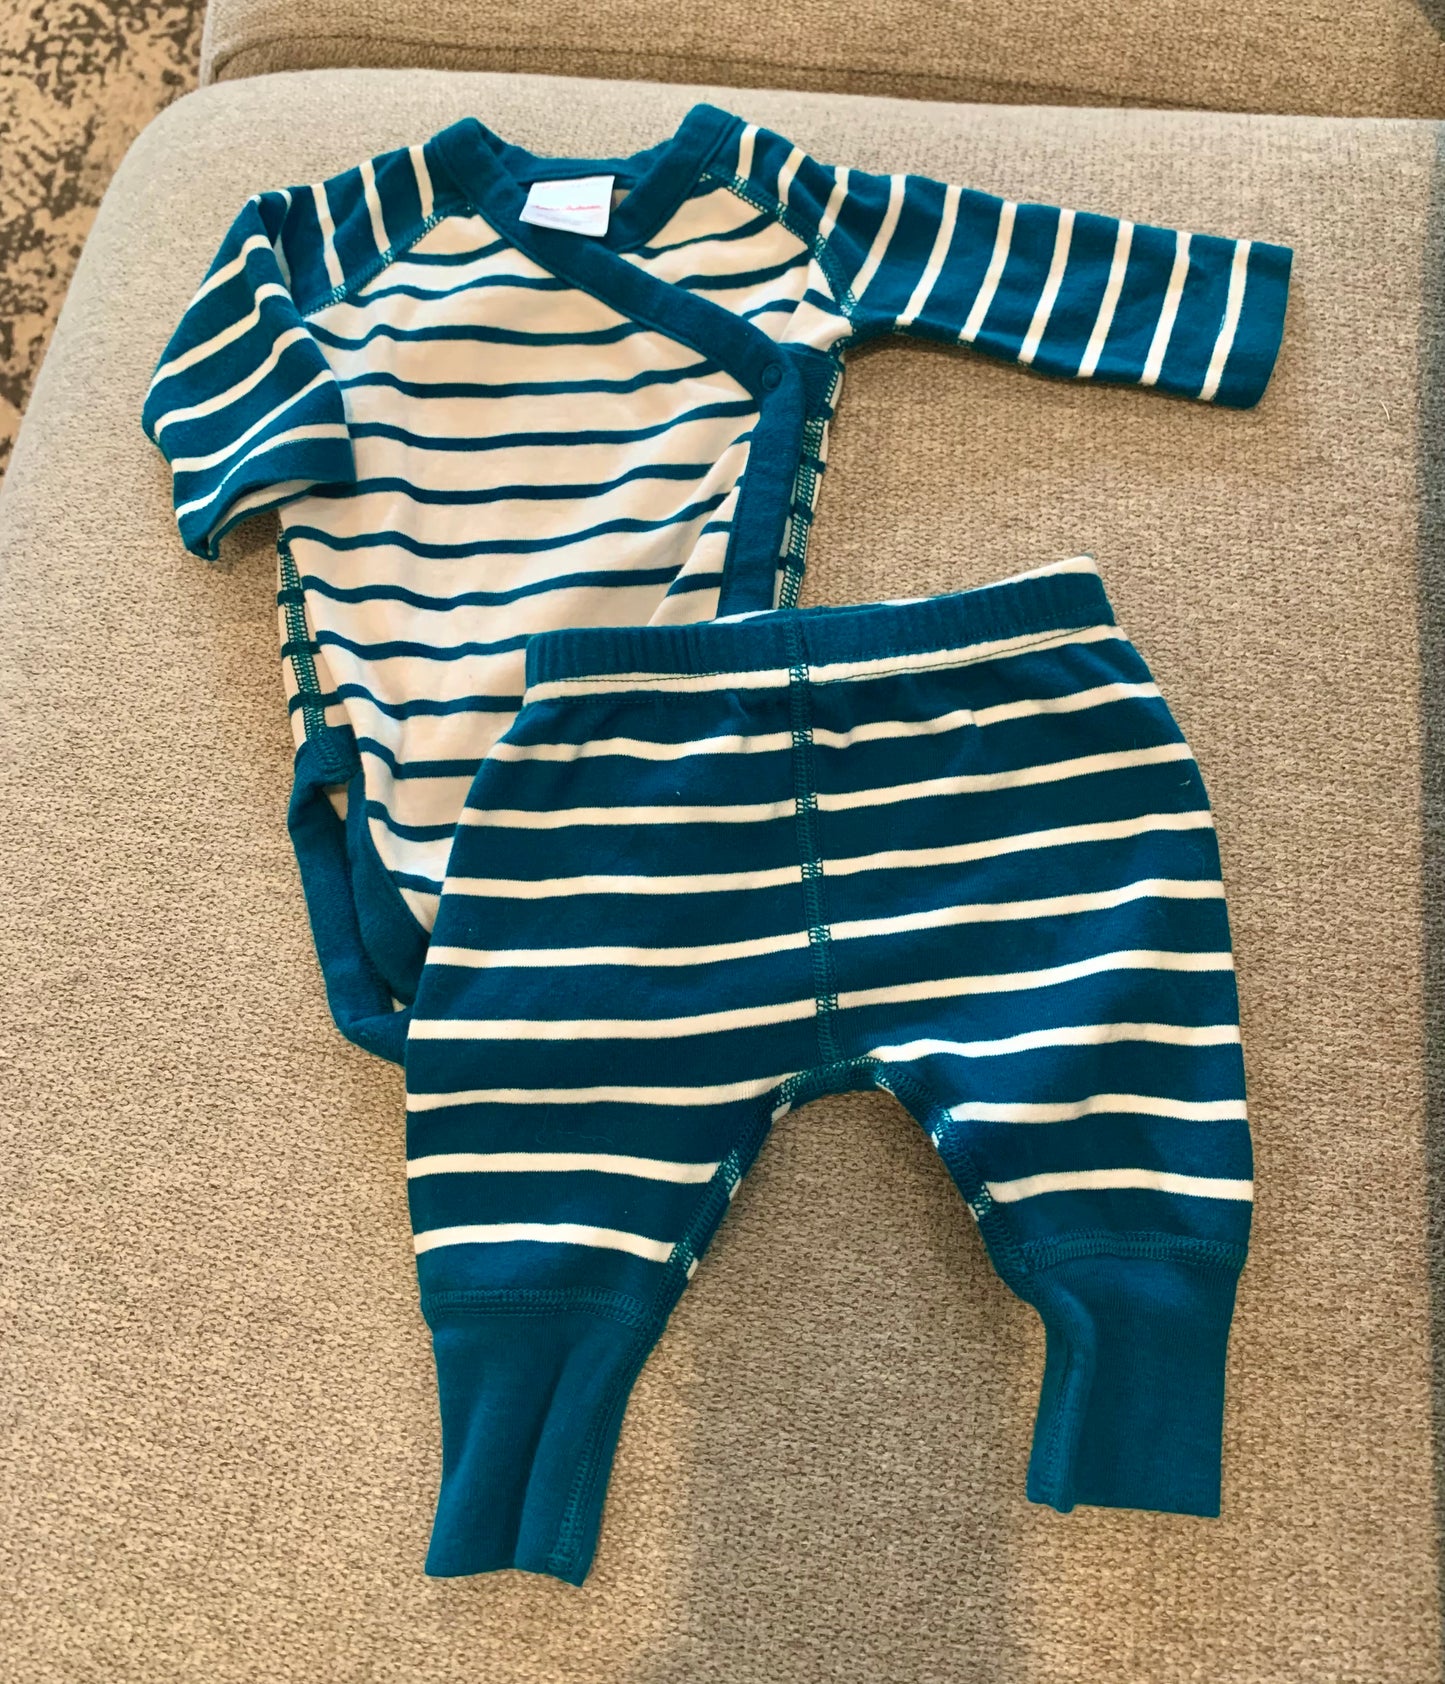 hanna Andersson, 0-3 mos, two-piece top+bottom